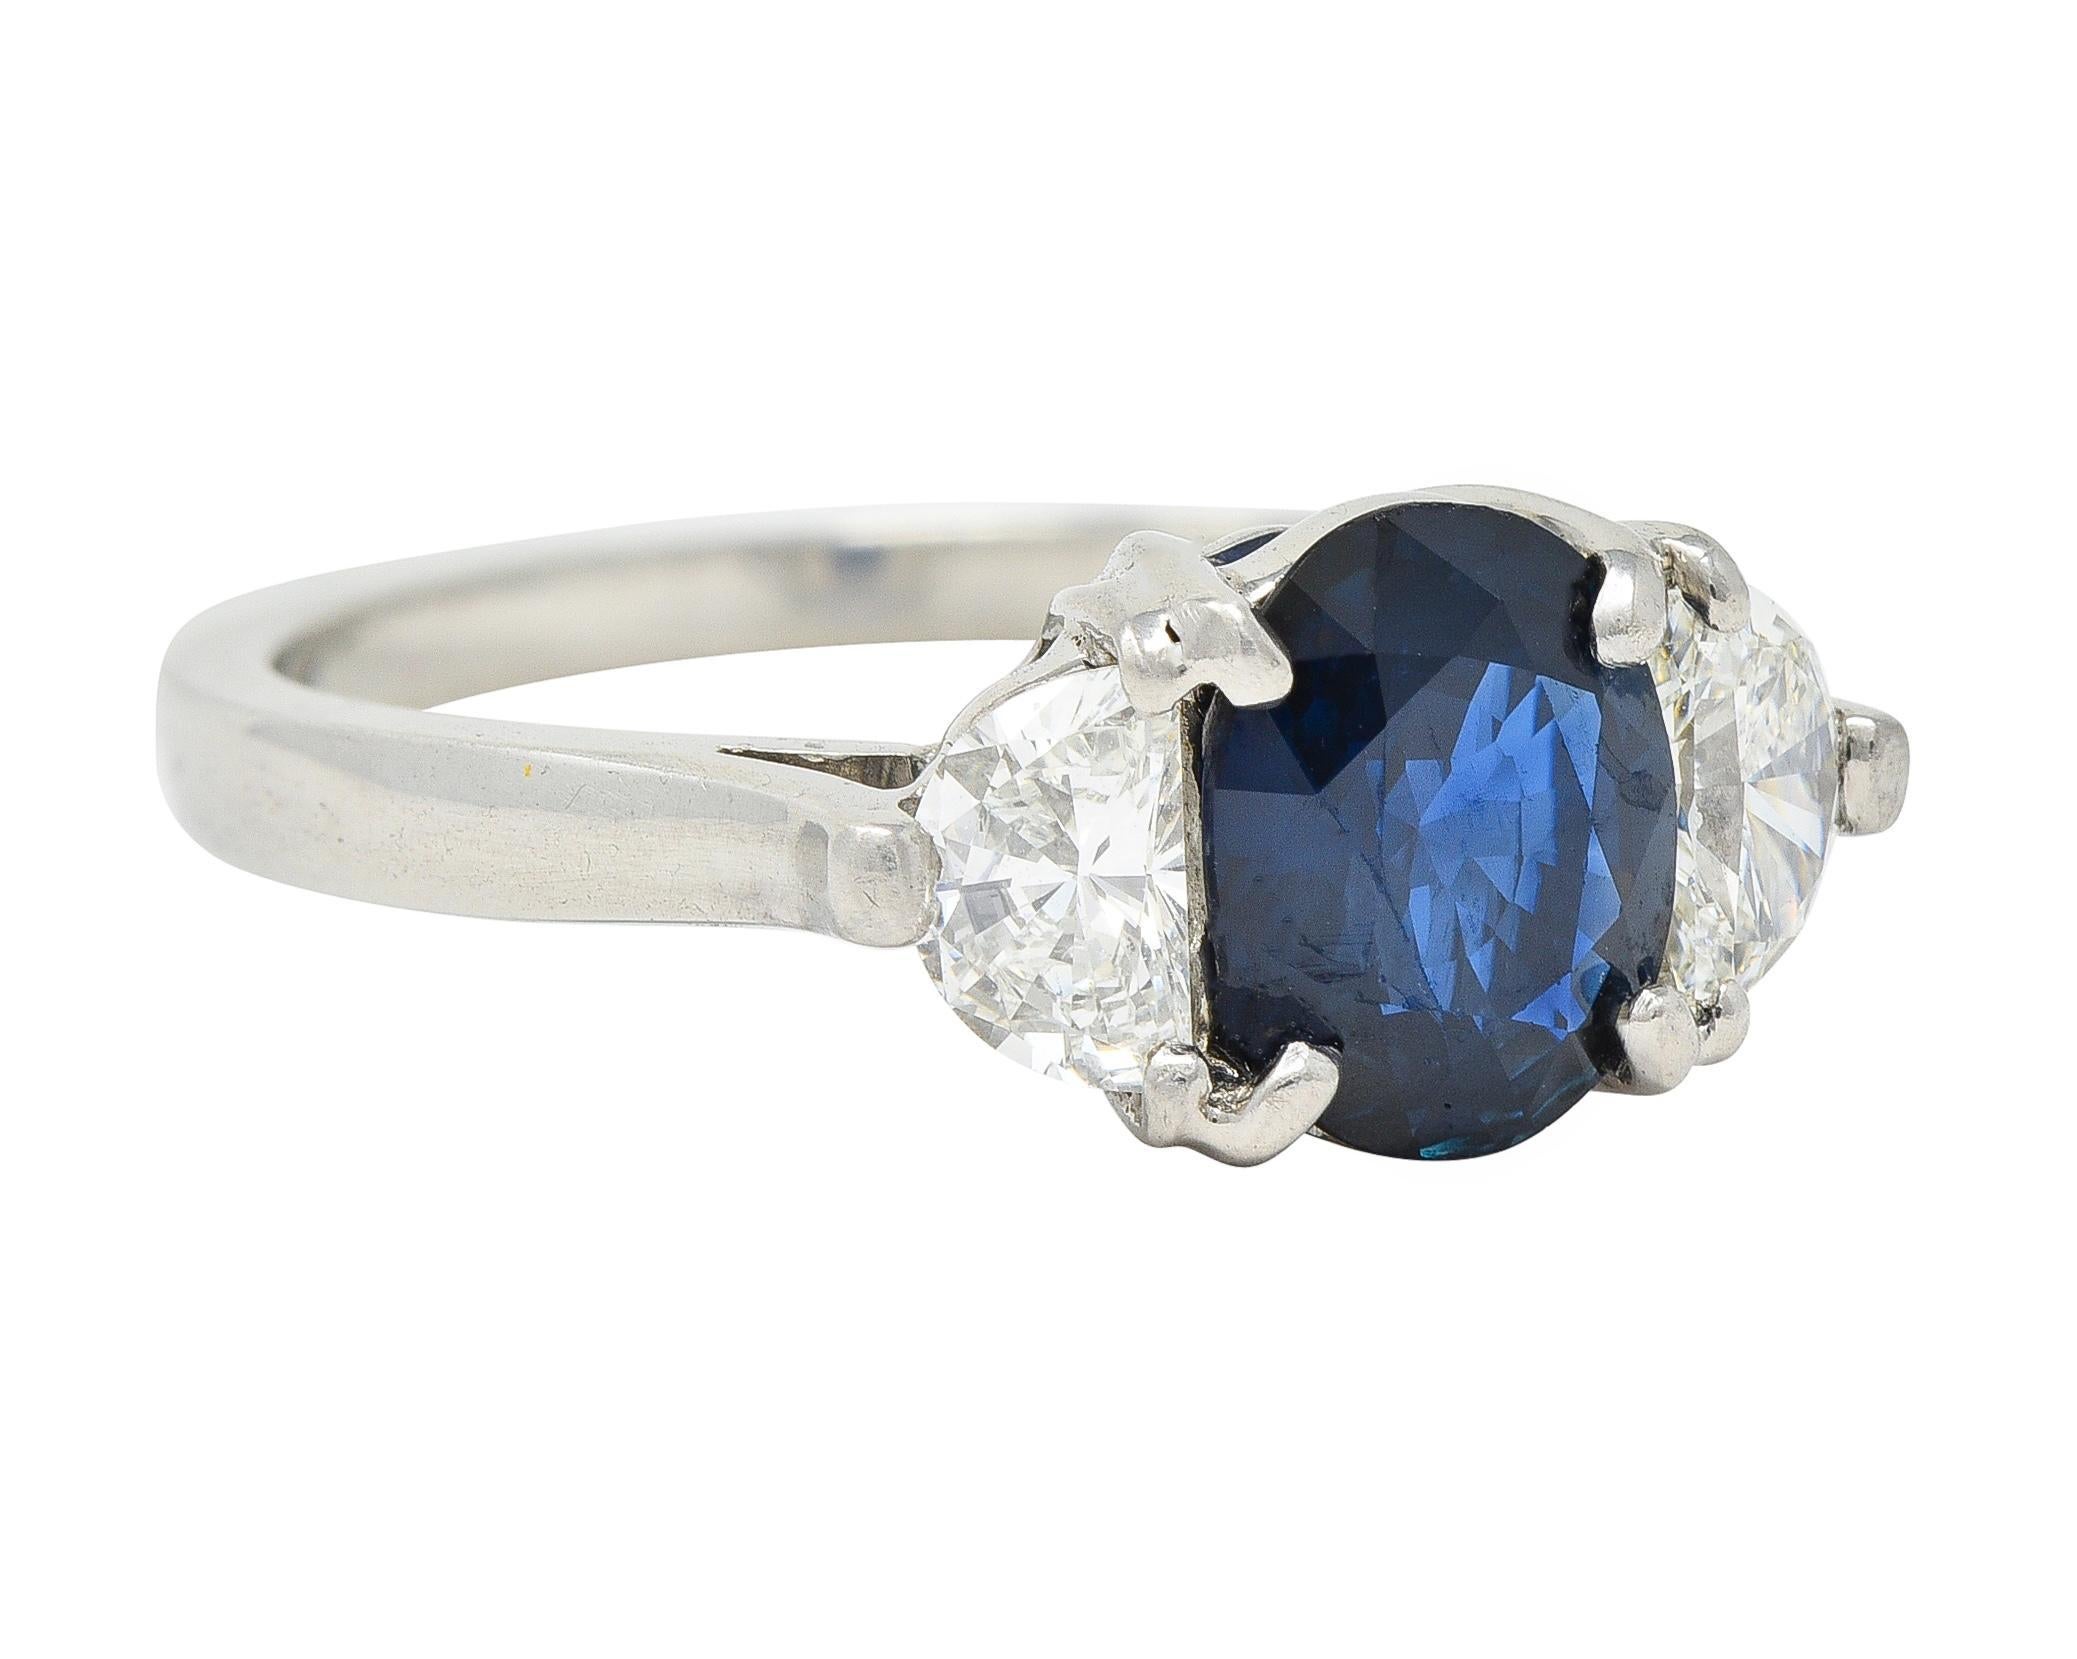 Centering and oval cut sapphire weighing approximately 1.59 carats - transparent dark blue 
Prong set in basket and flanked by half-moon cut diamonds 
Weighing approximately 0.48 carat total - J color with VS2 clarity
Prong set in cathedral